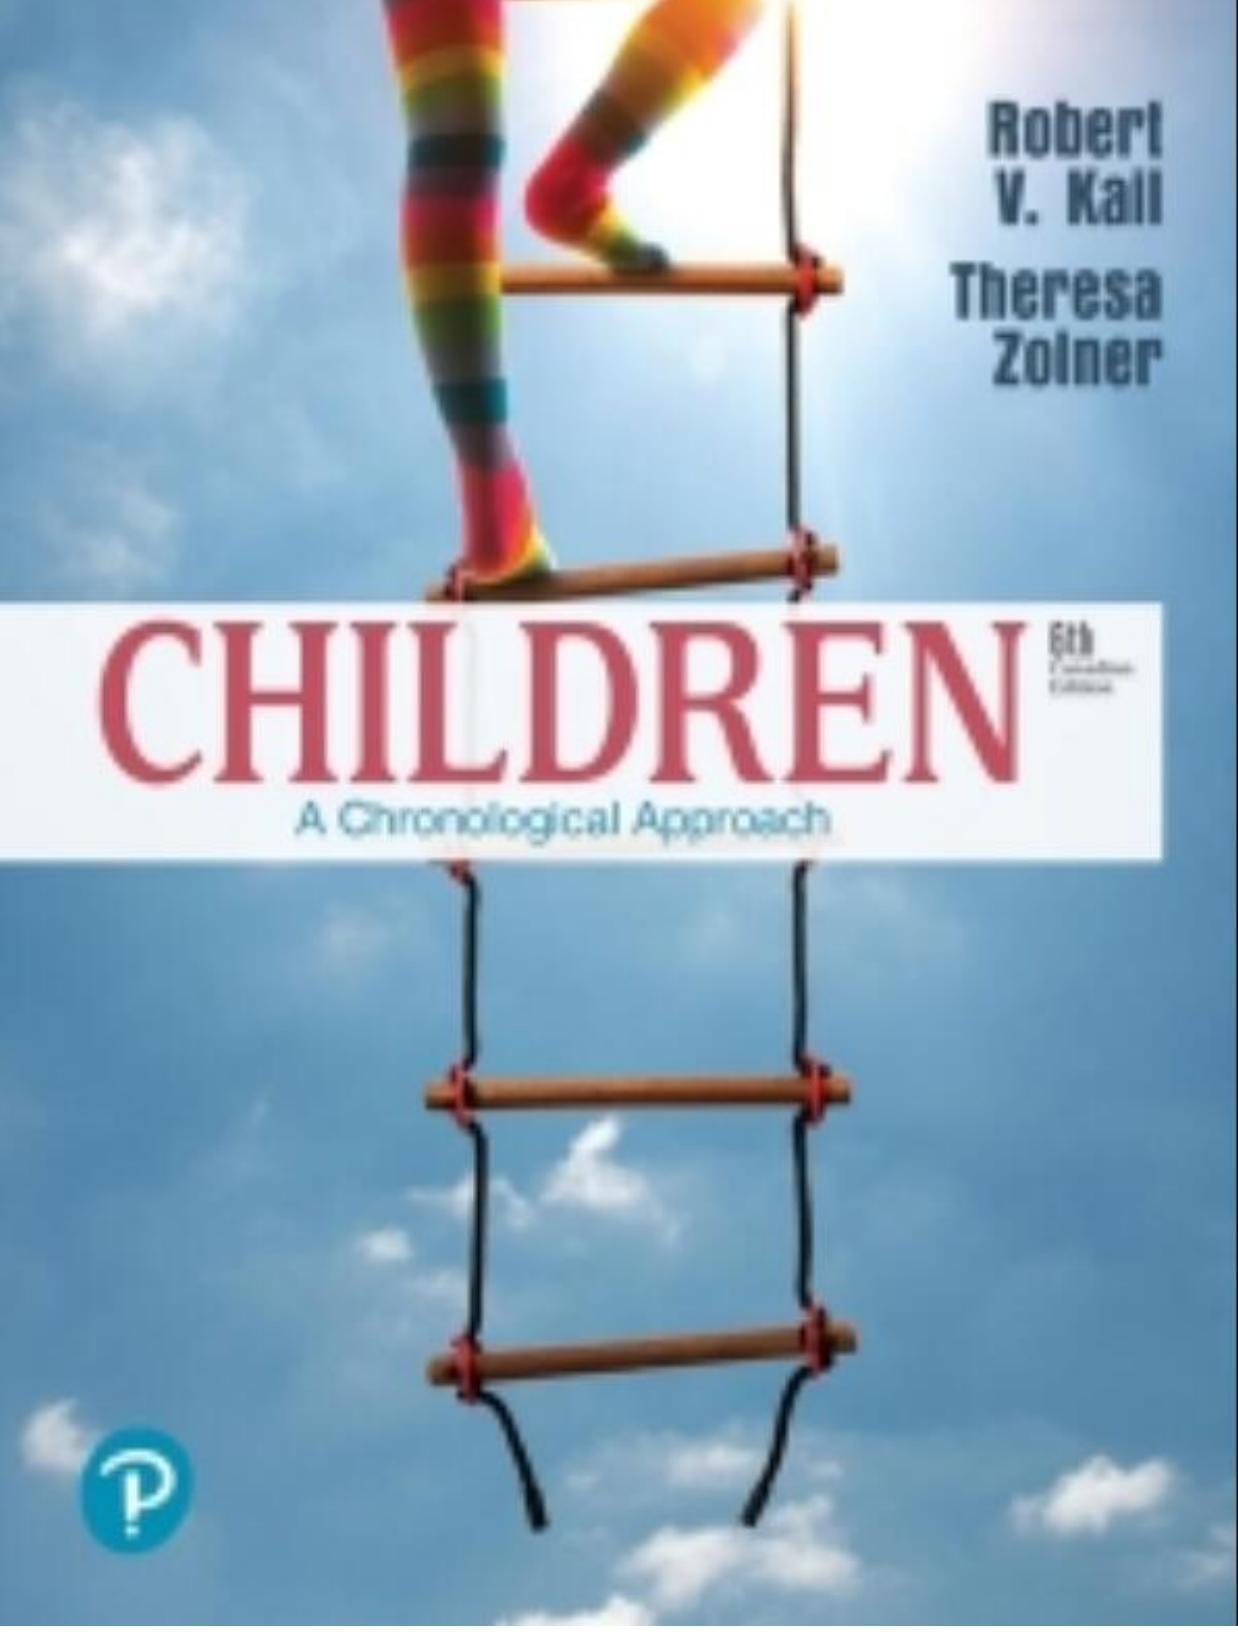 (eBook PDF)Children: A Chronological Approach 6th Canadian Edition by Robert V. Kail,Theresa Zolner